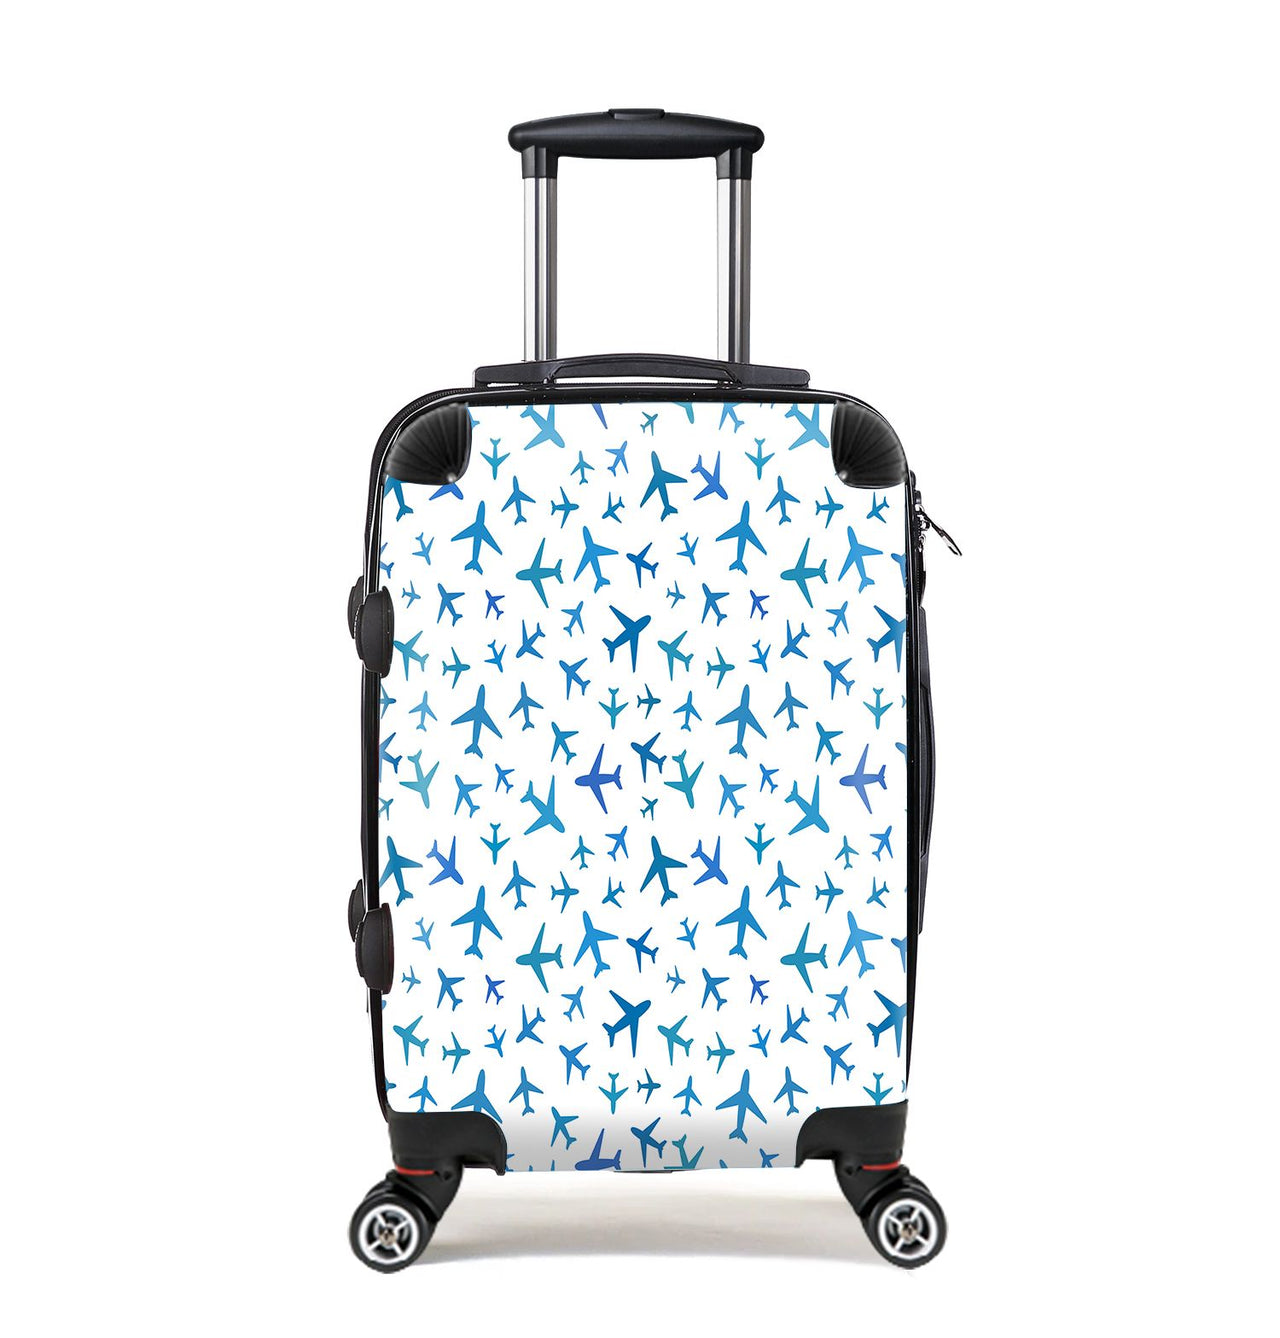 Many Airplanes White Designed Cabin Size Luggages